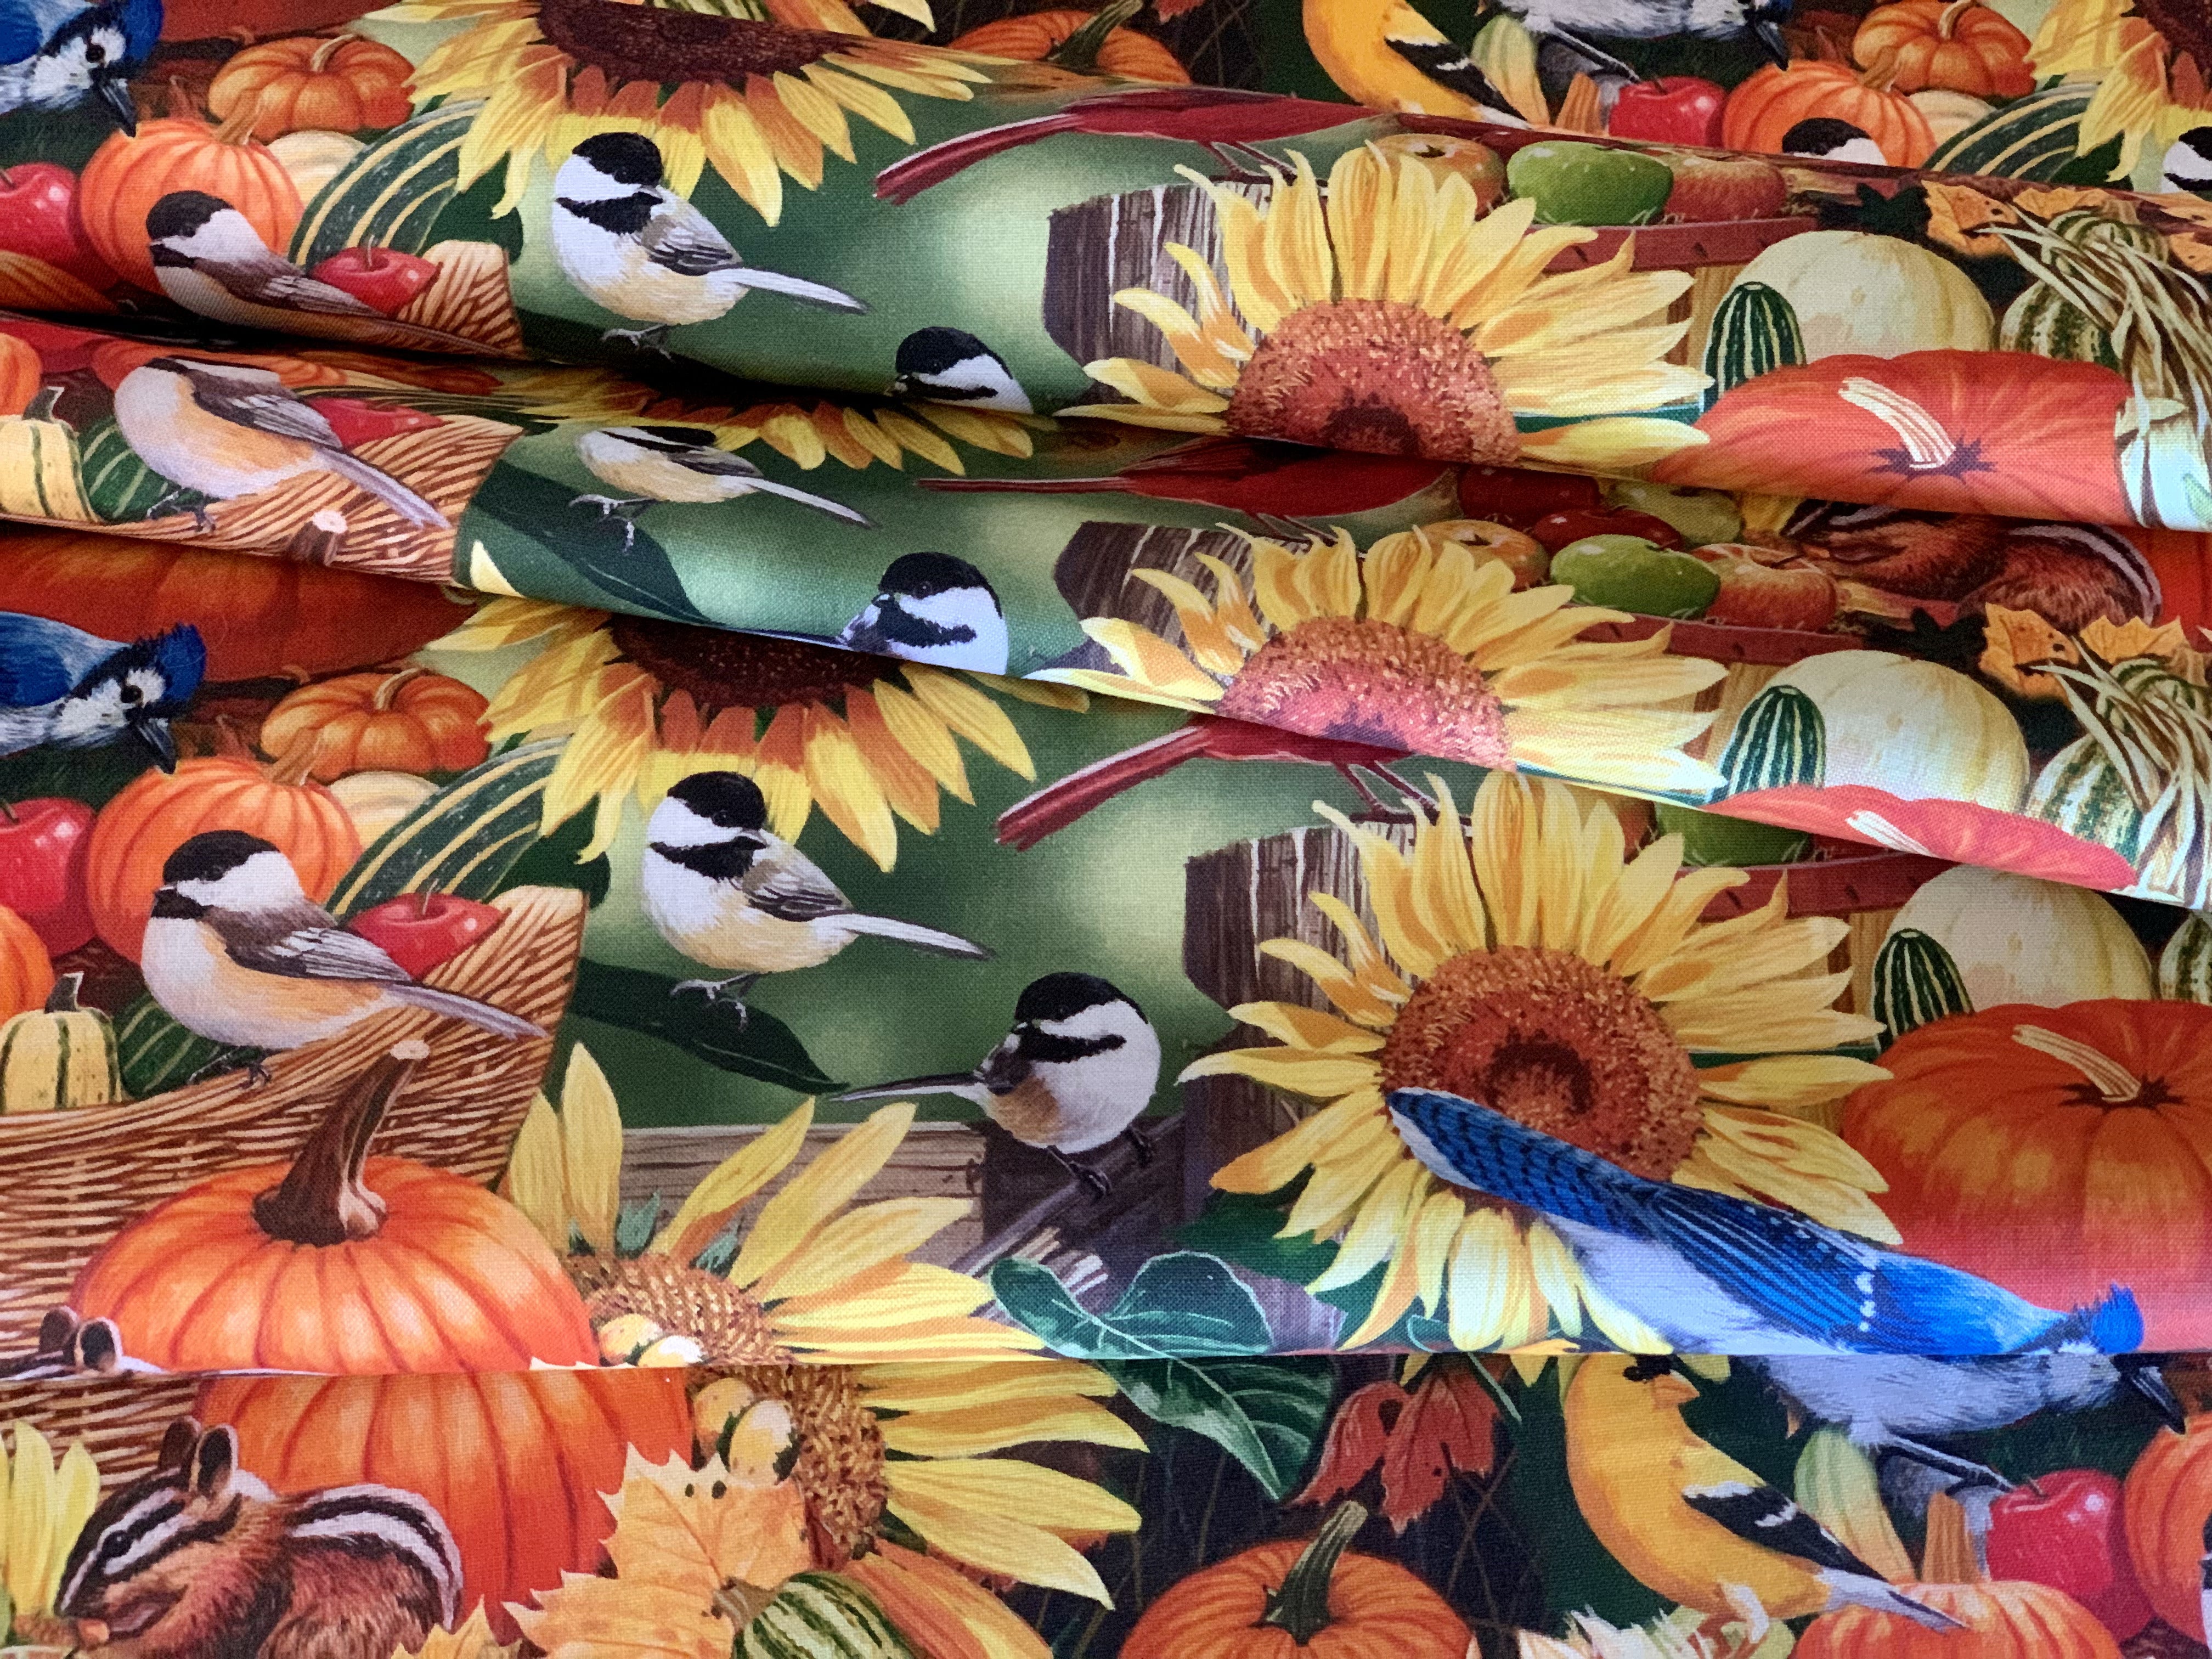 David Textiles Birds for all Seasons - Birds and Pumpkins Panel and Fabric by the Yard - Fall Fabric